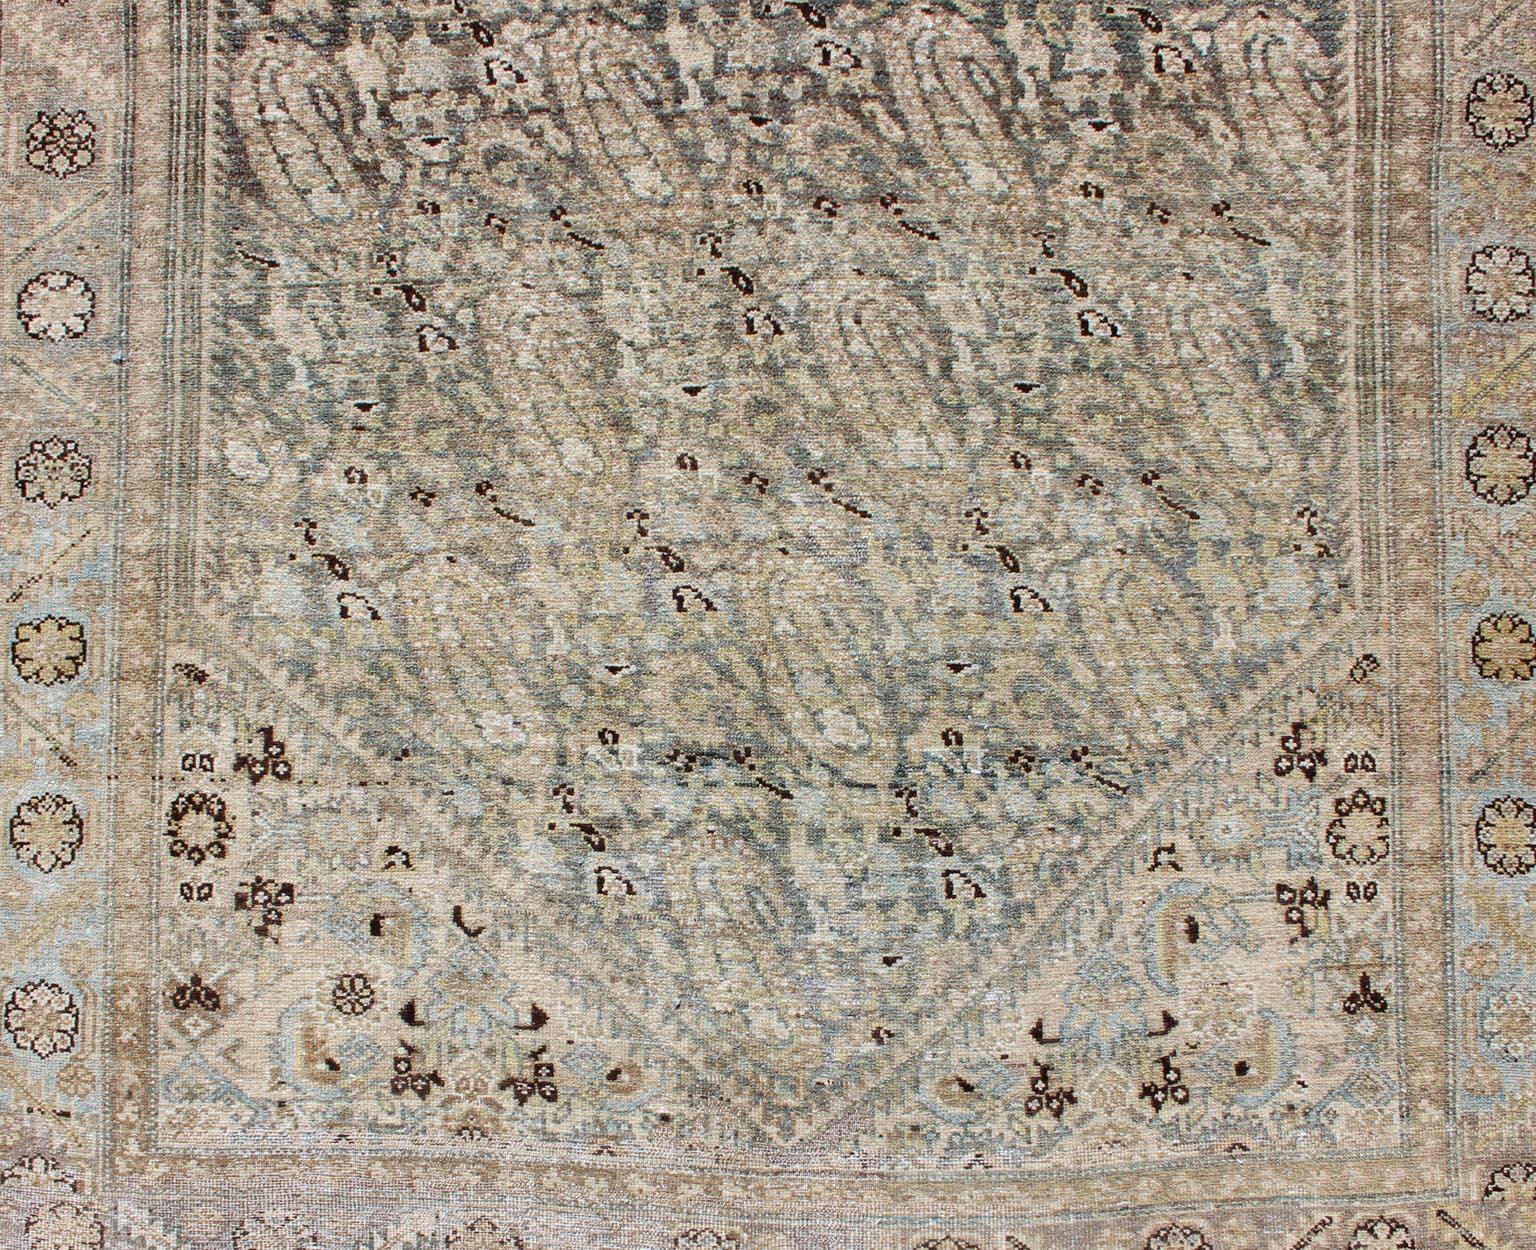 Gray and Earth Tones Paisley Design Gallery Malayer Rug with Paisley Design 1